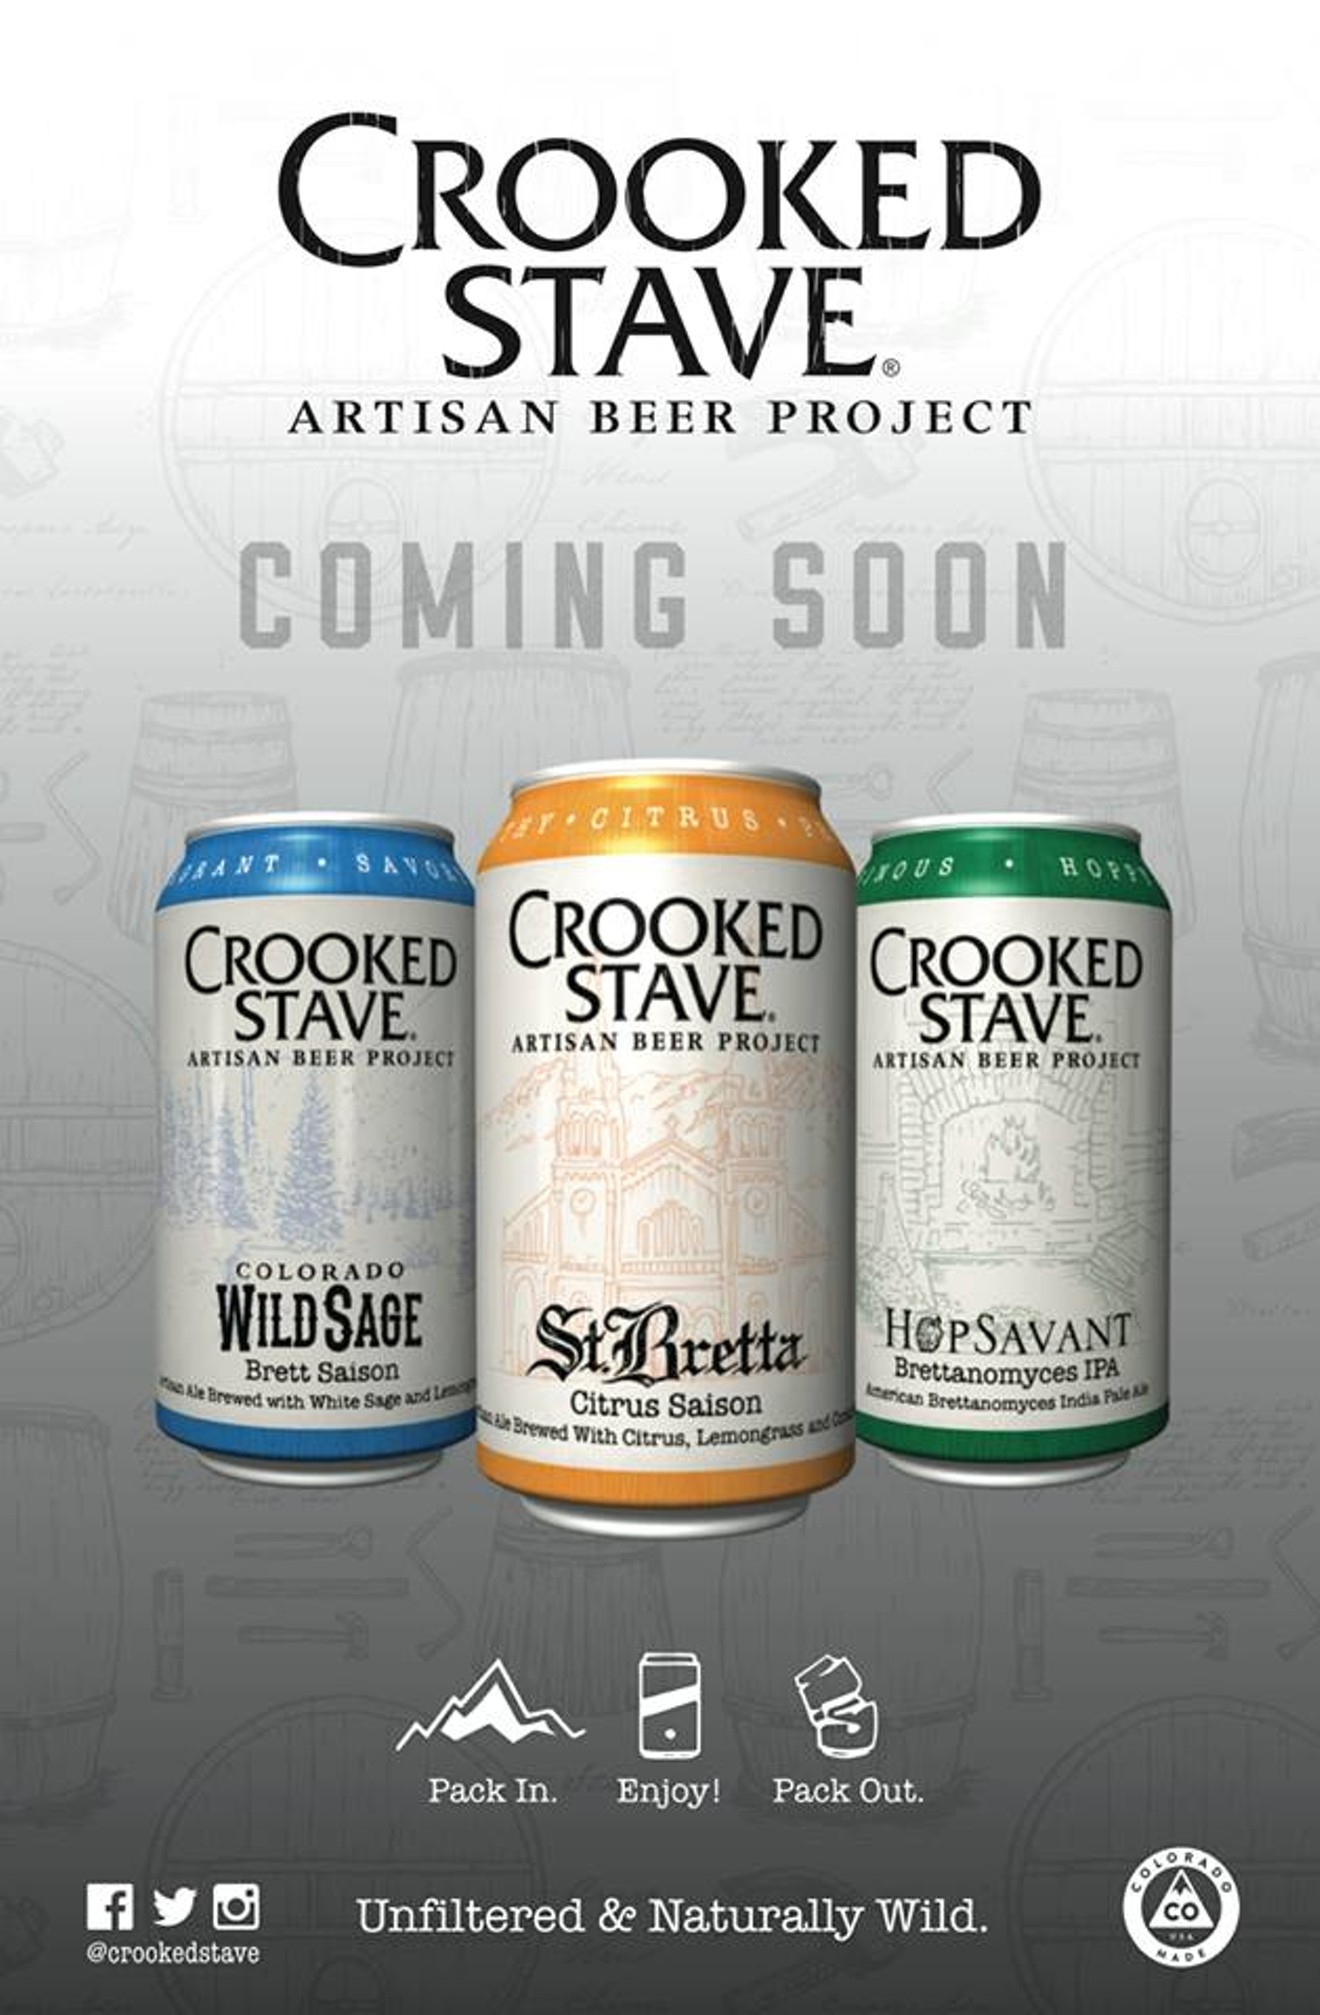 Crooked Stave will sell three of its Brettanomyces beers in cans this summer.